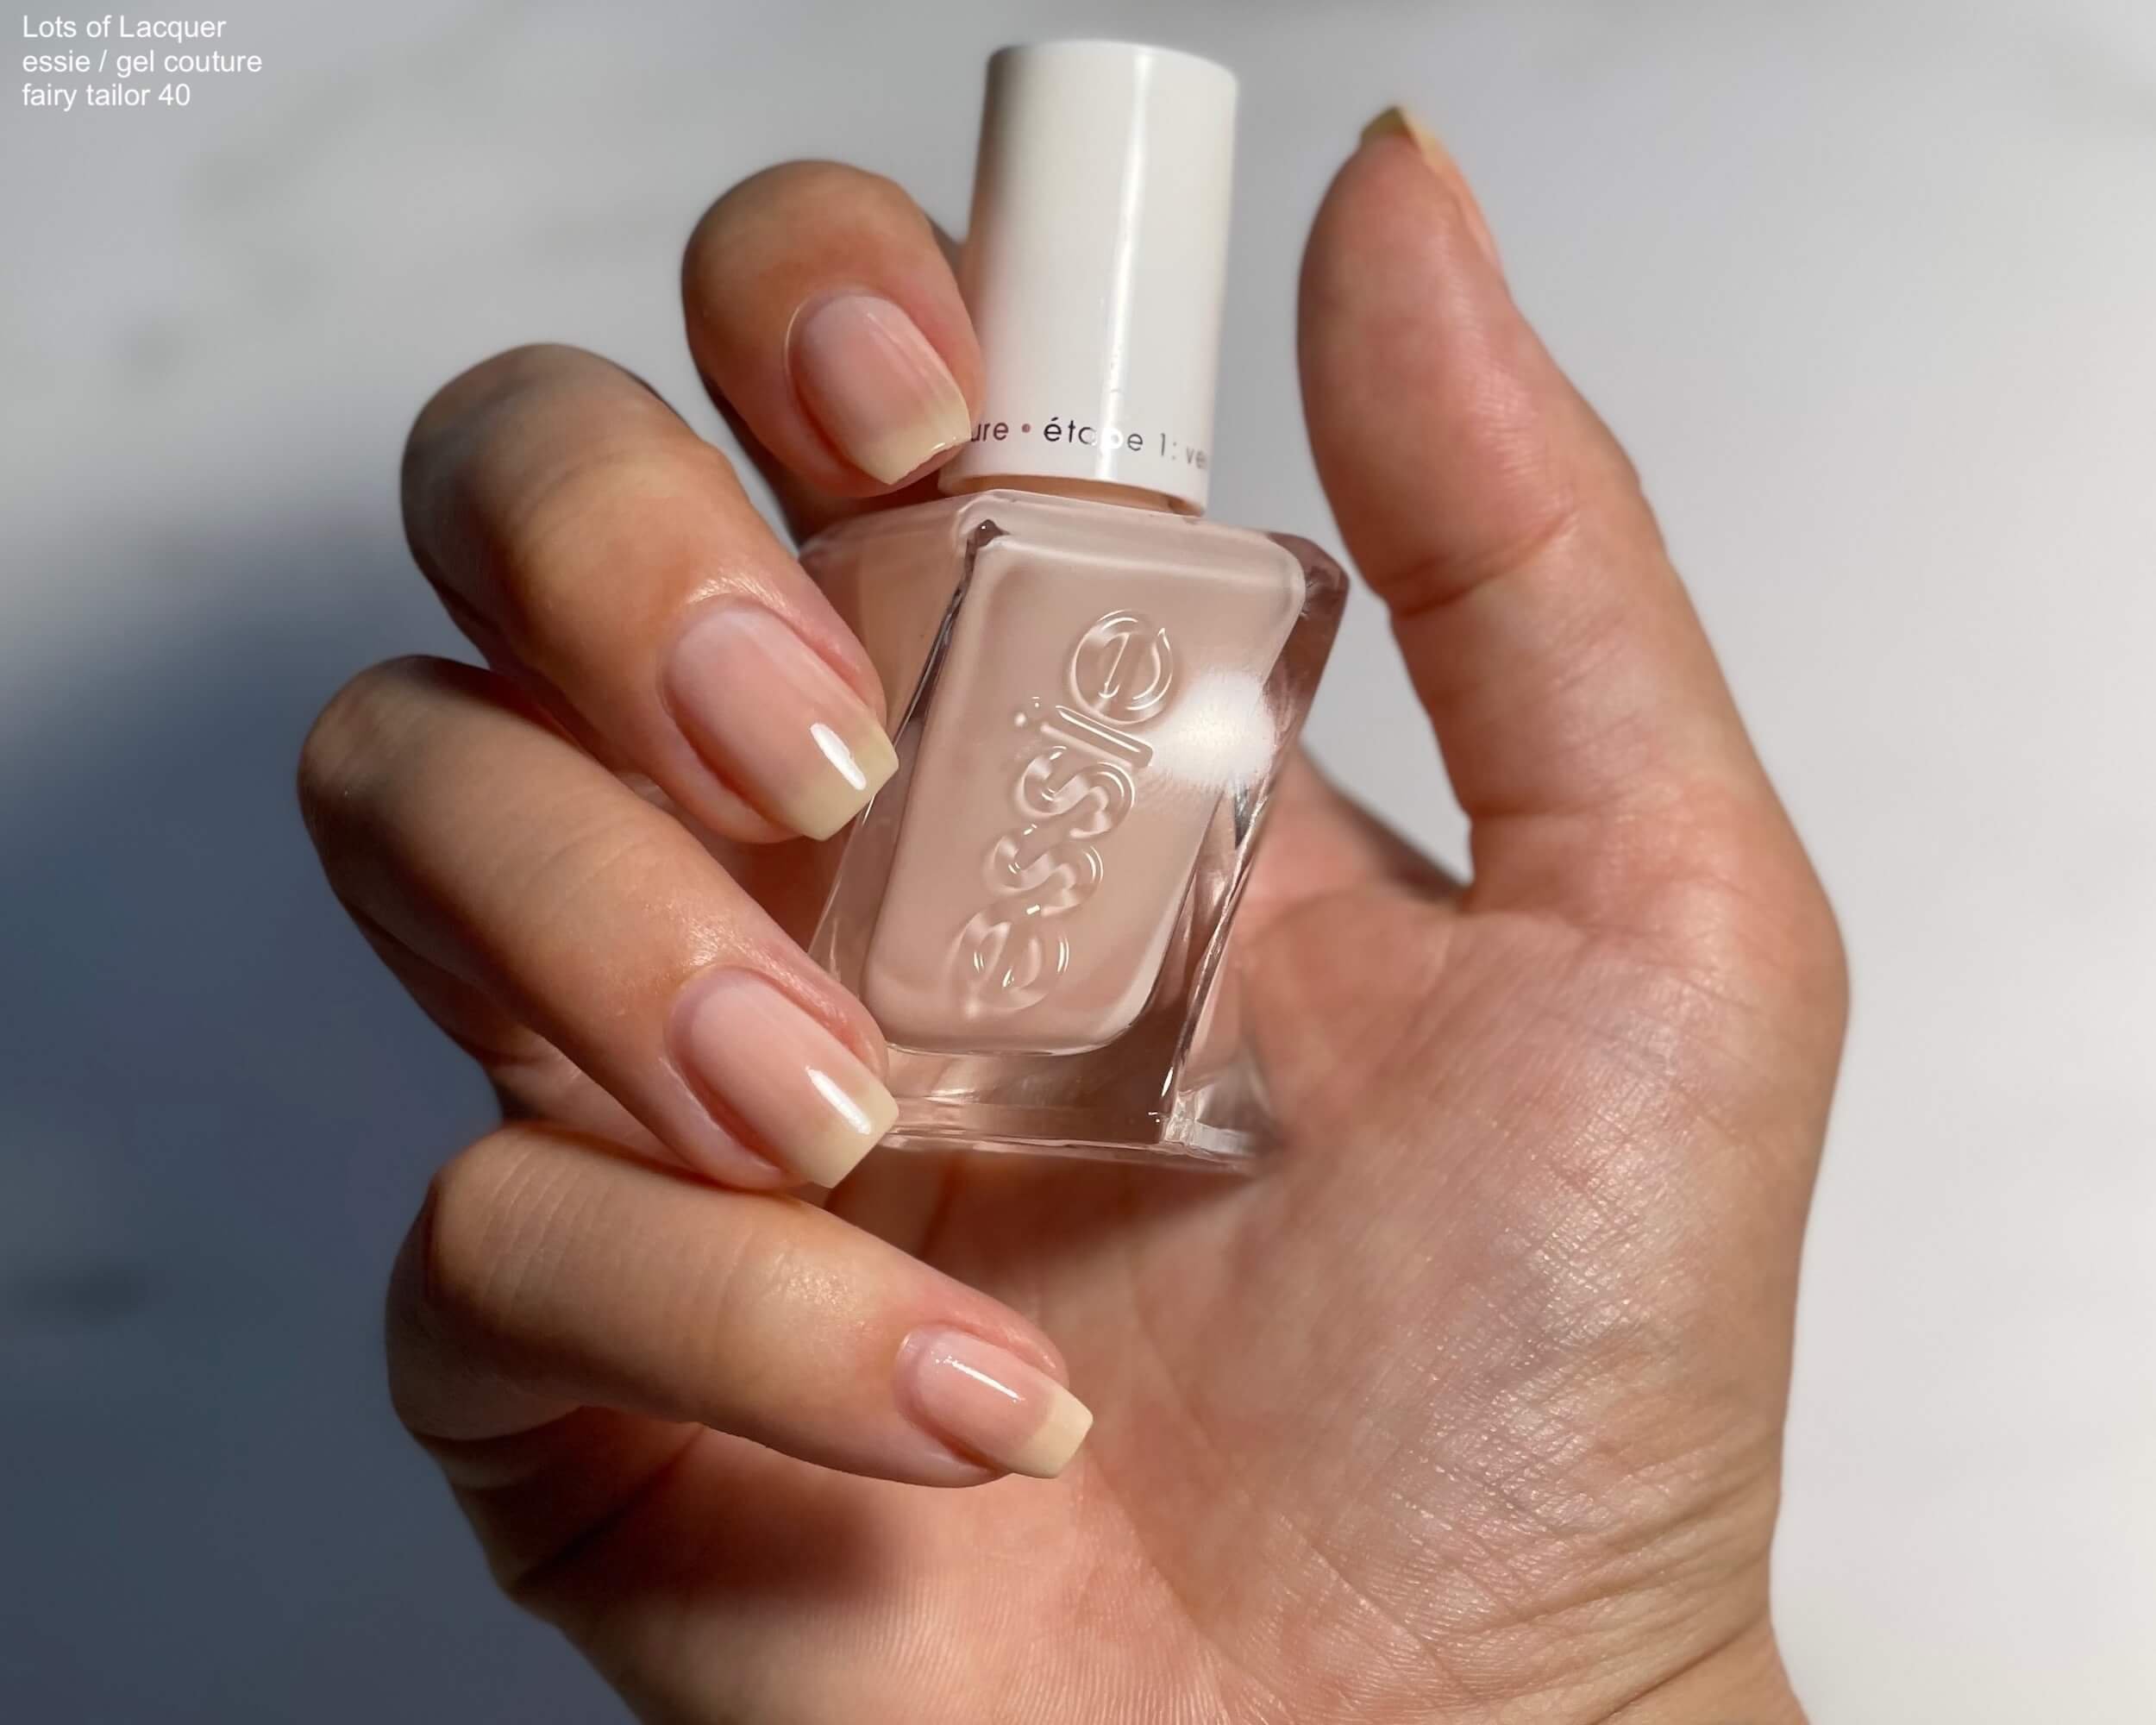 2. Essie Gel Couture Nail Polish in "Fairy Tailor" - wide 5